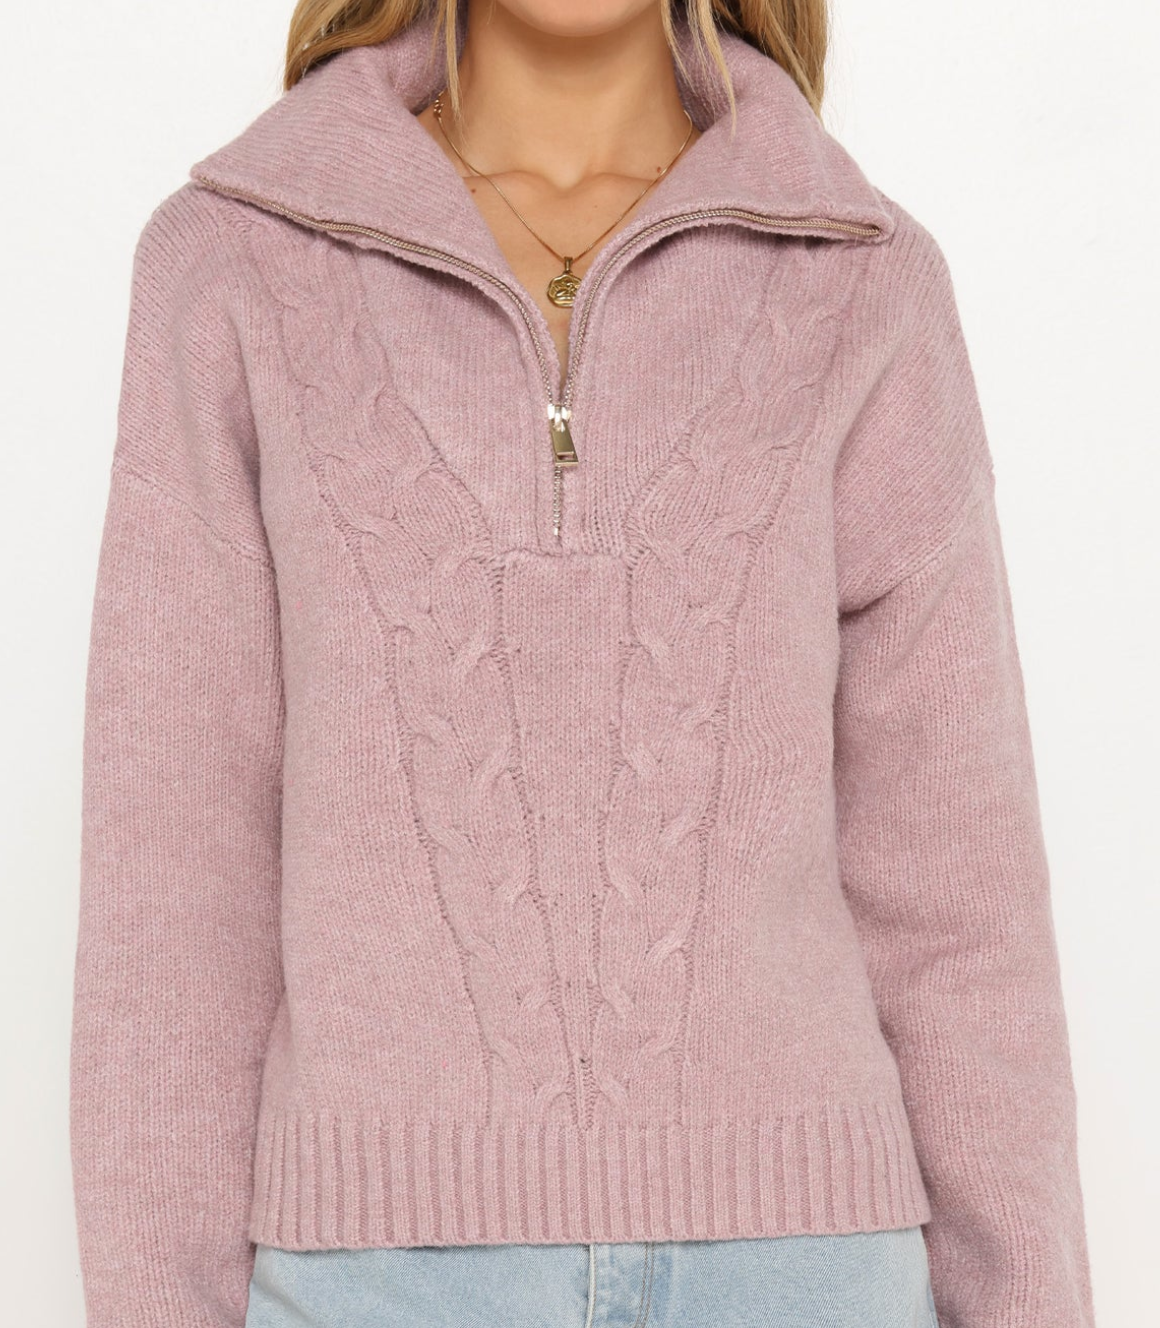 Keirra Knit Pullover Sweater